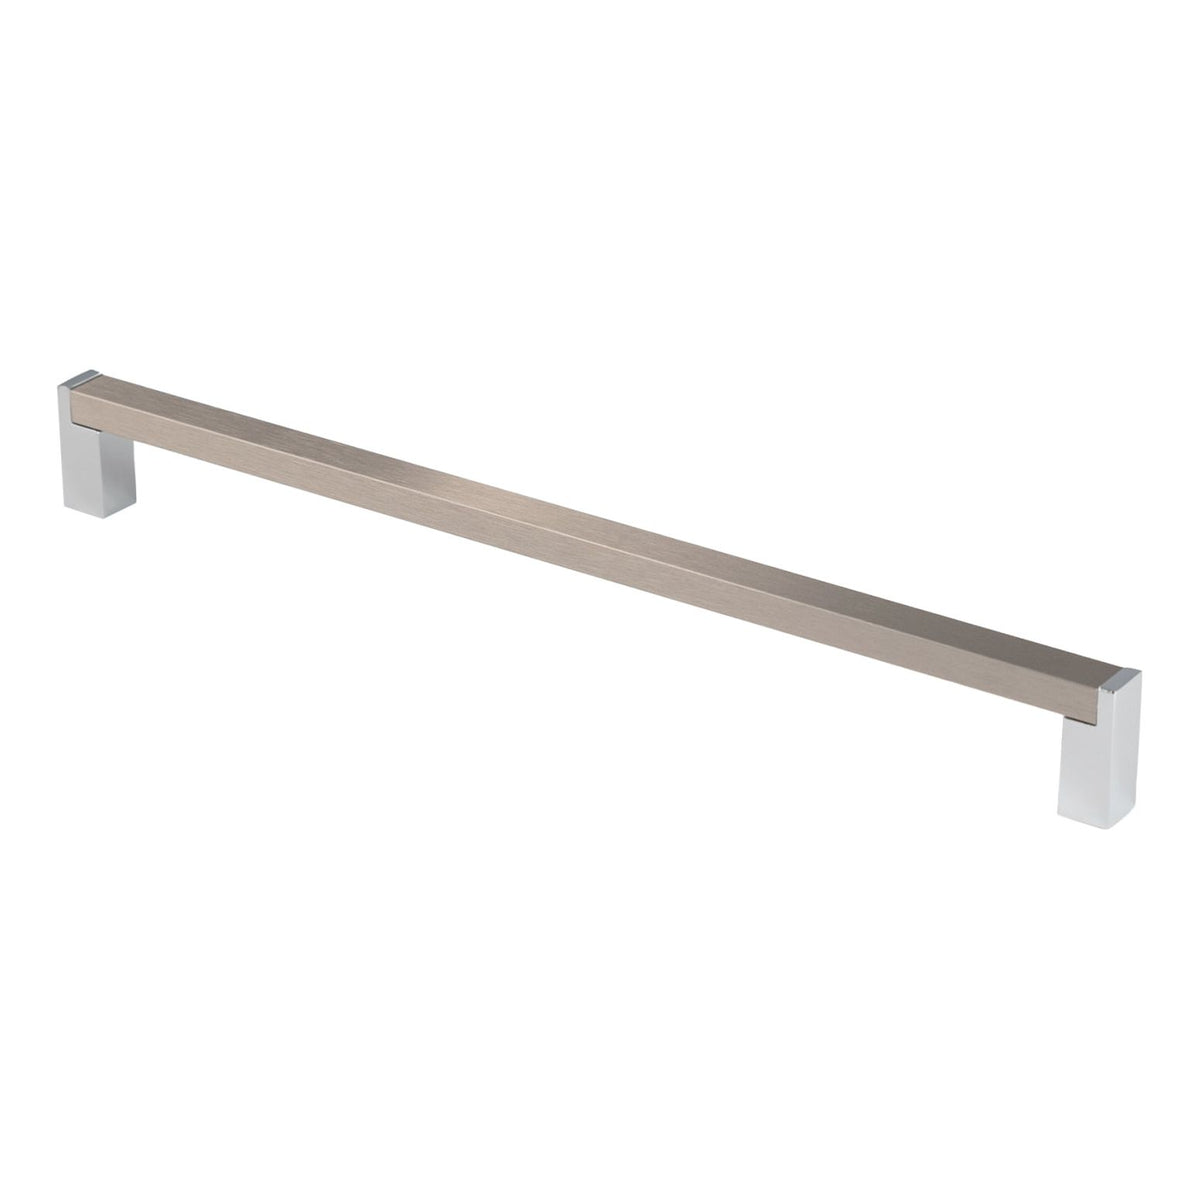 Rocheleau - POI-R2004-256-PC-BSN - Shopify - 3.93 - Chrome and Brushed Nickel